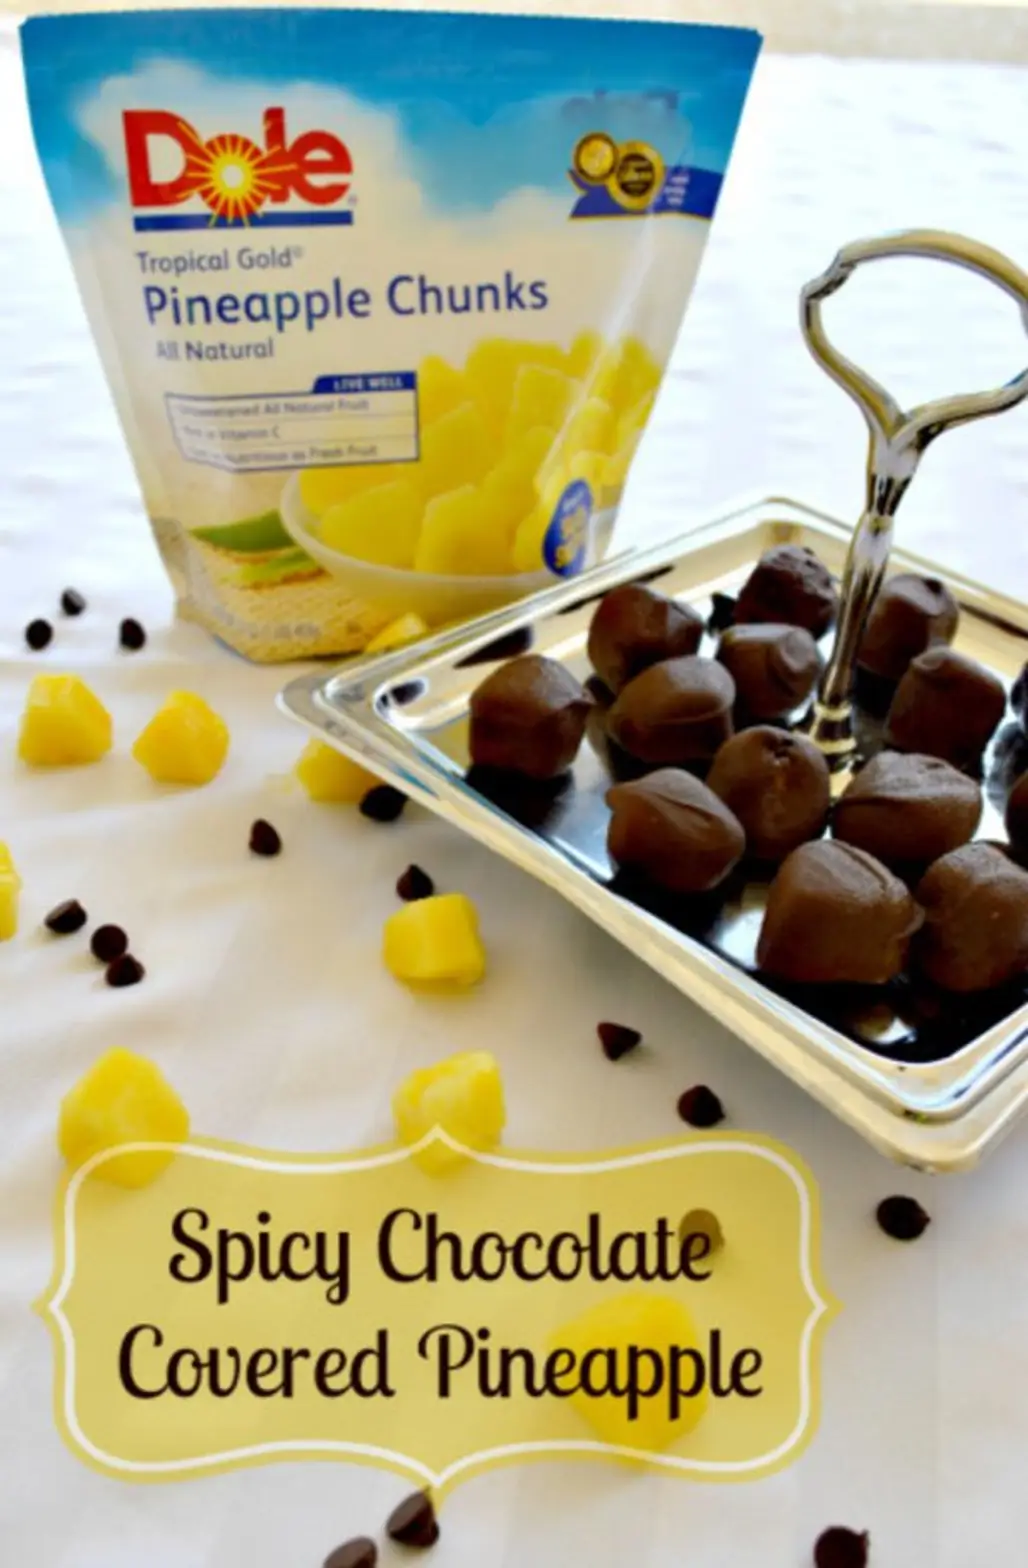 Spicy Chocolate Covered Pineapple